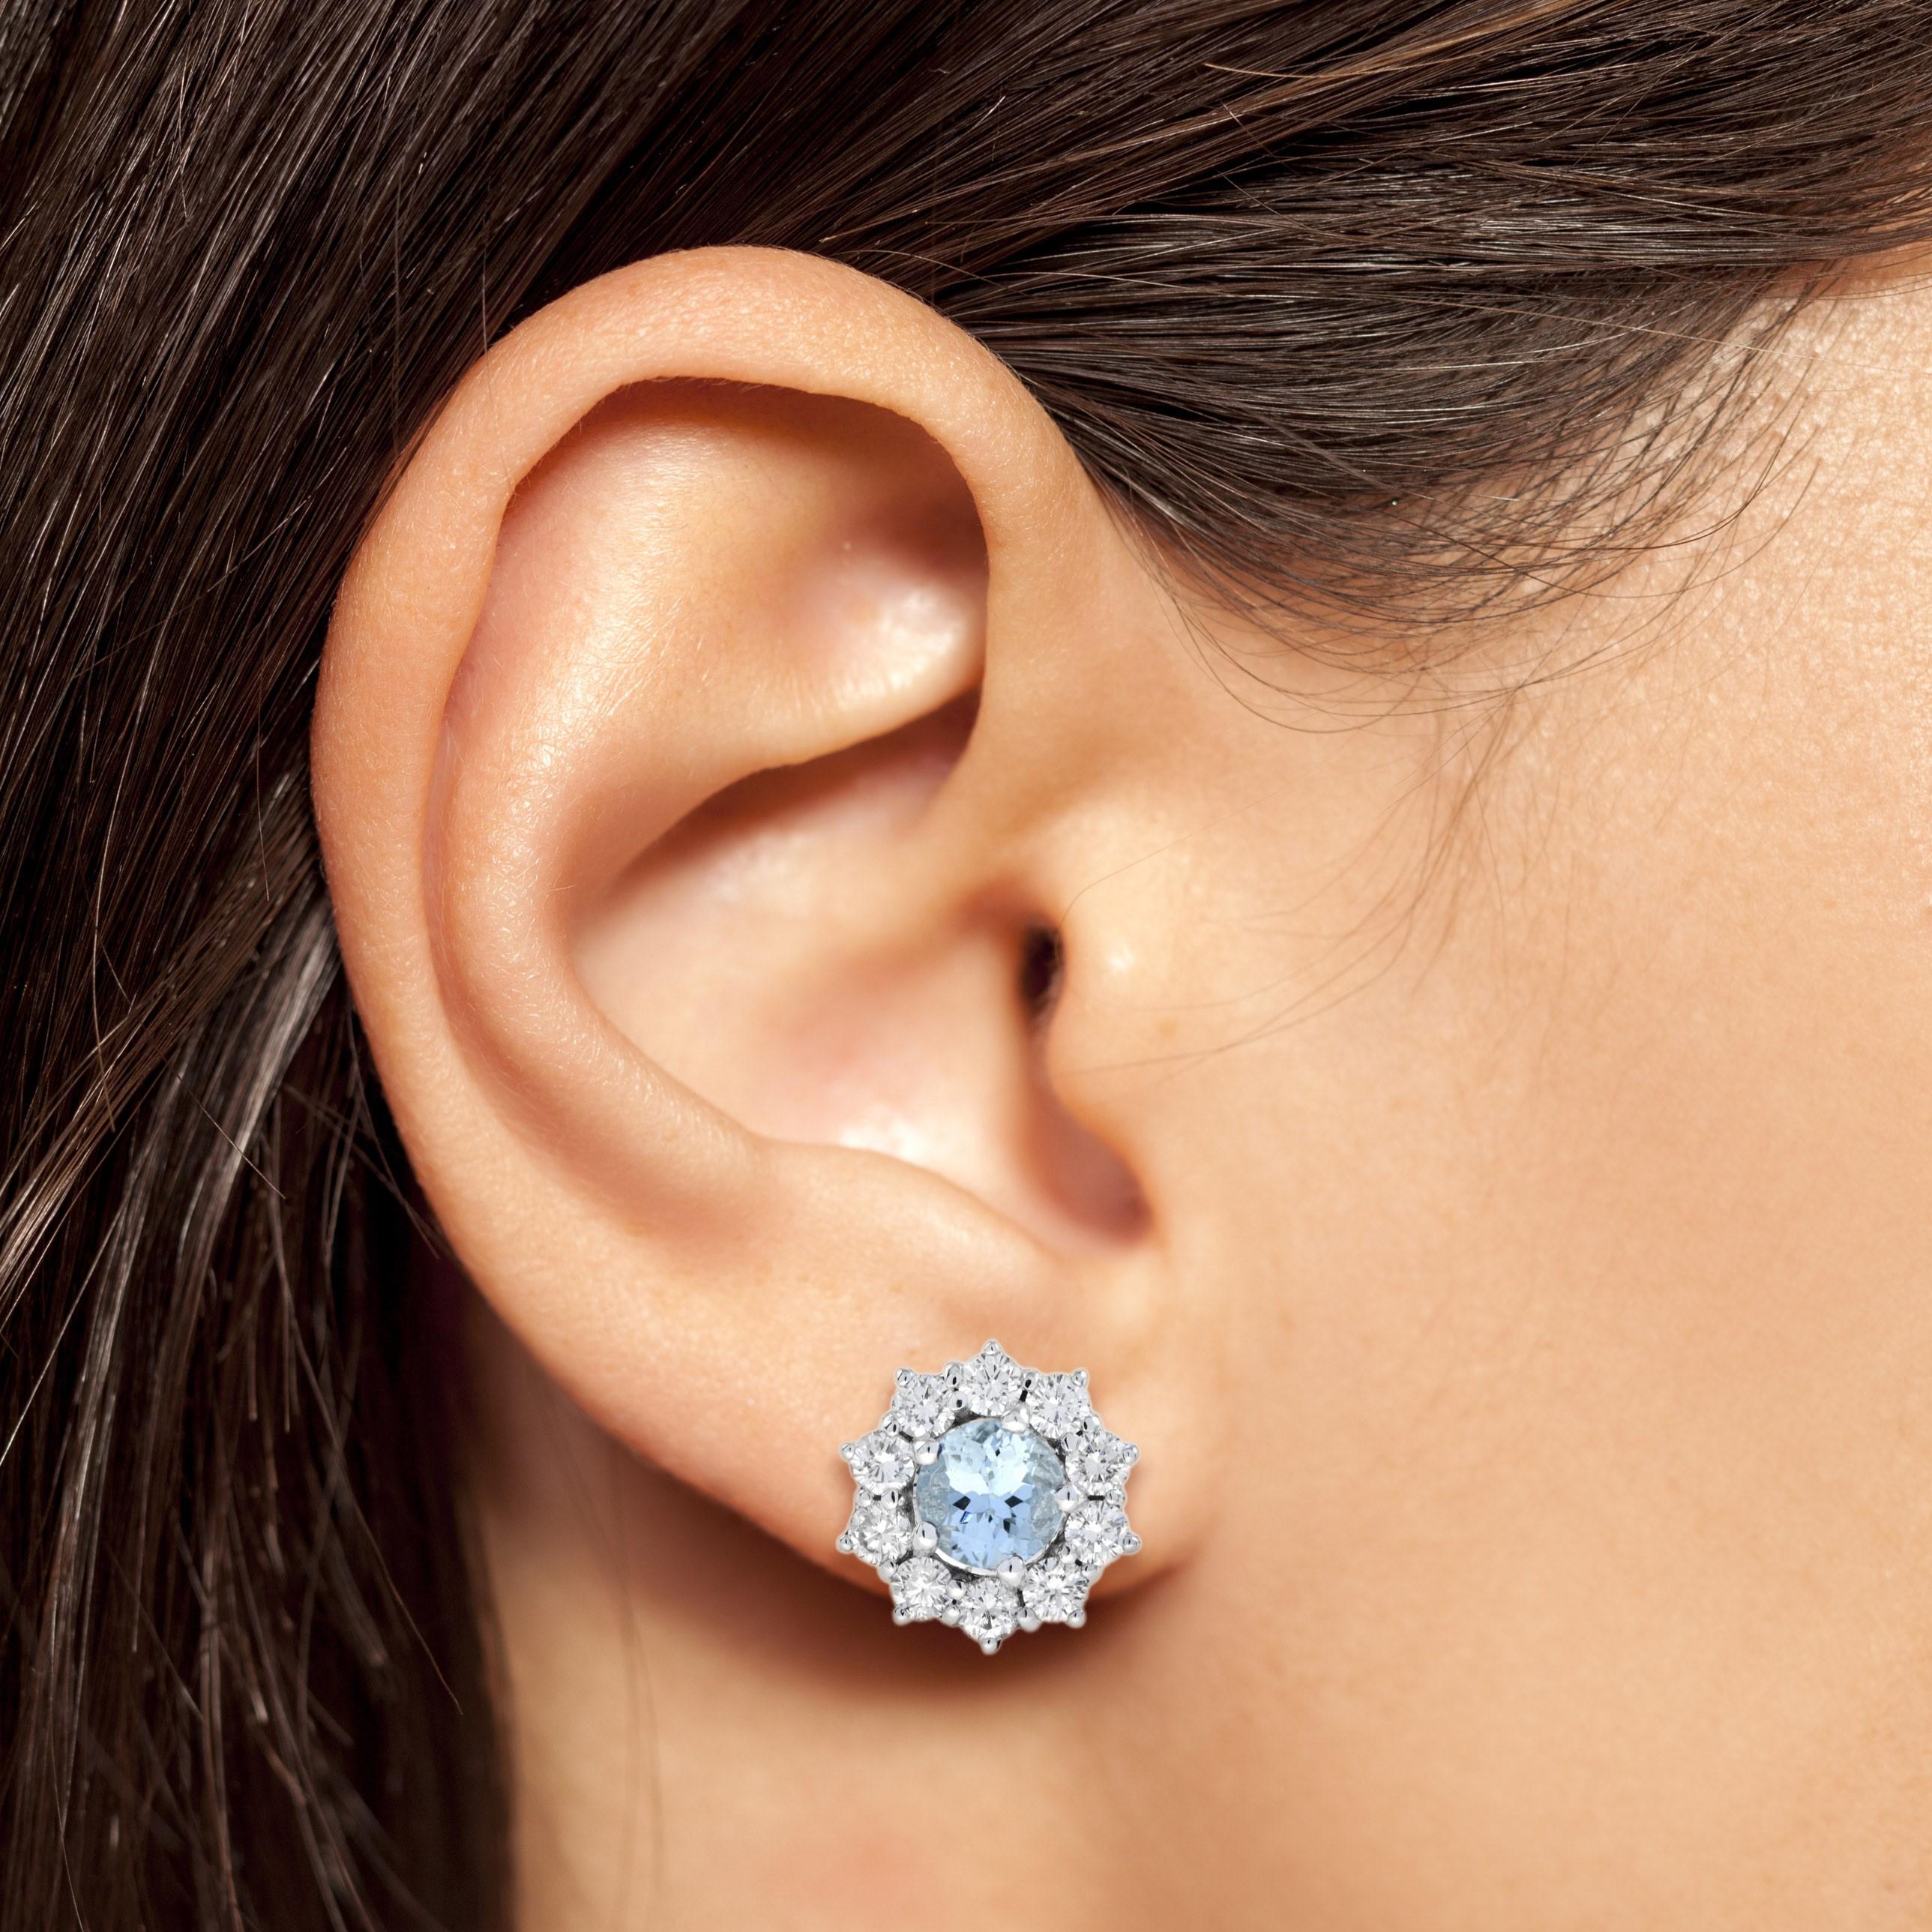 These captivating aquamarine diamond stud earrings have been crafted from the finest 18K white gold. A stunning surface polish has been applied to the surface of earrings to bring out the bright hue of the round cut aquamarine  gemstone hold at the